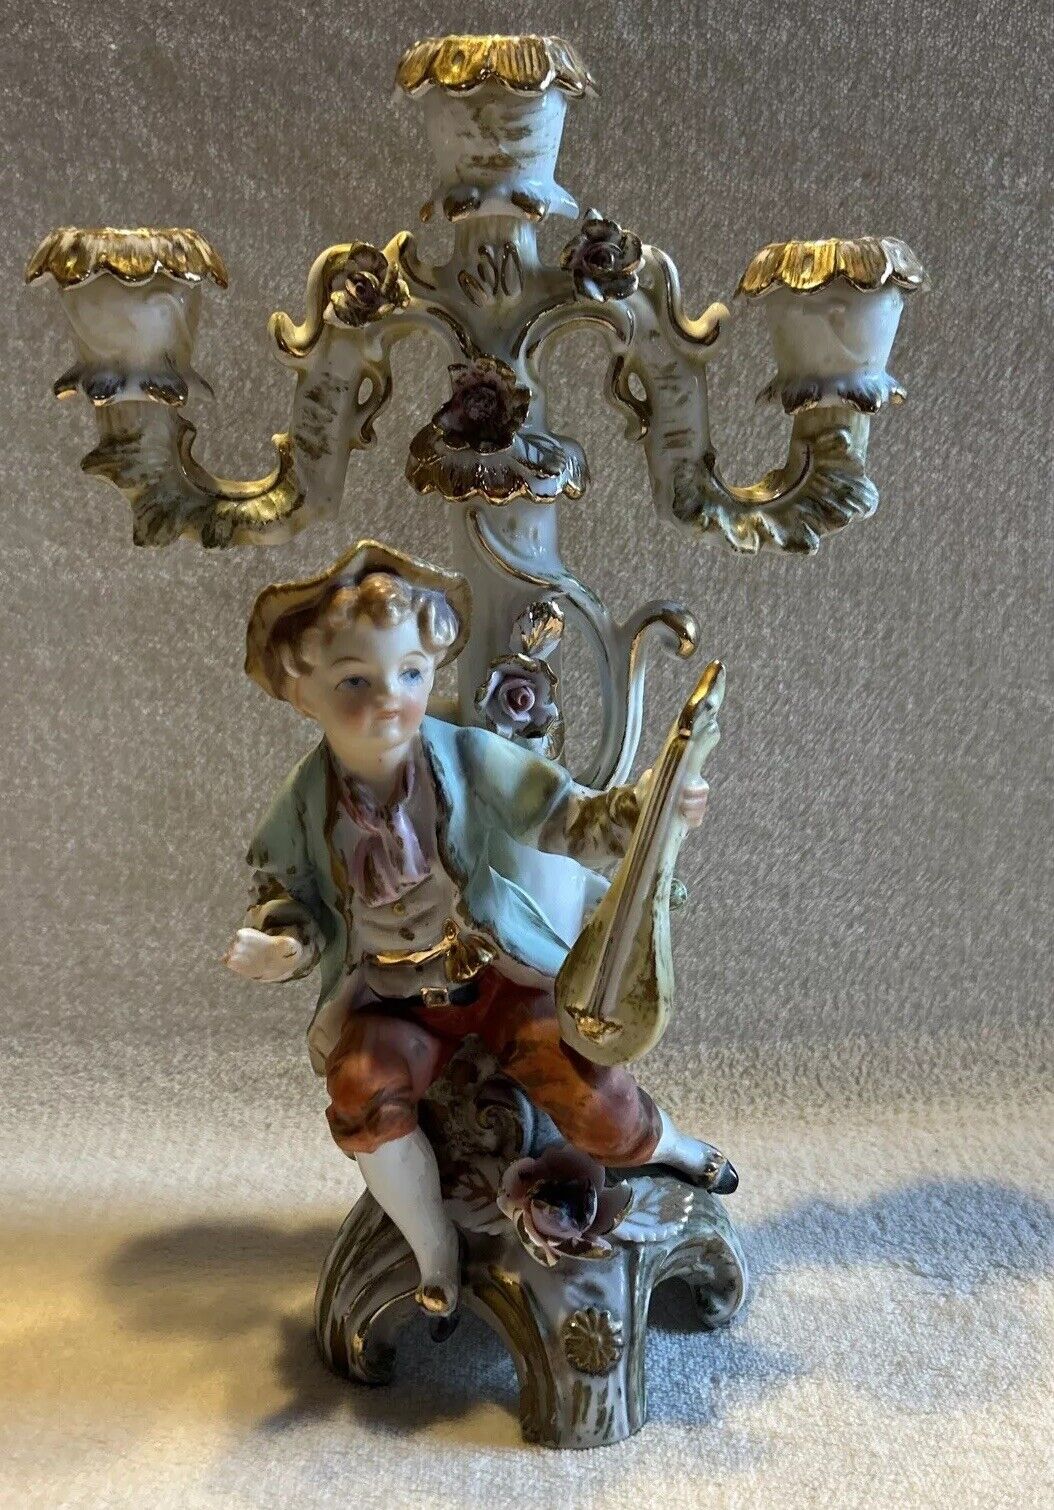 Vintage 1930’s Camille Naudot French Boy With Instrument. 3 Candle Holder.